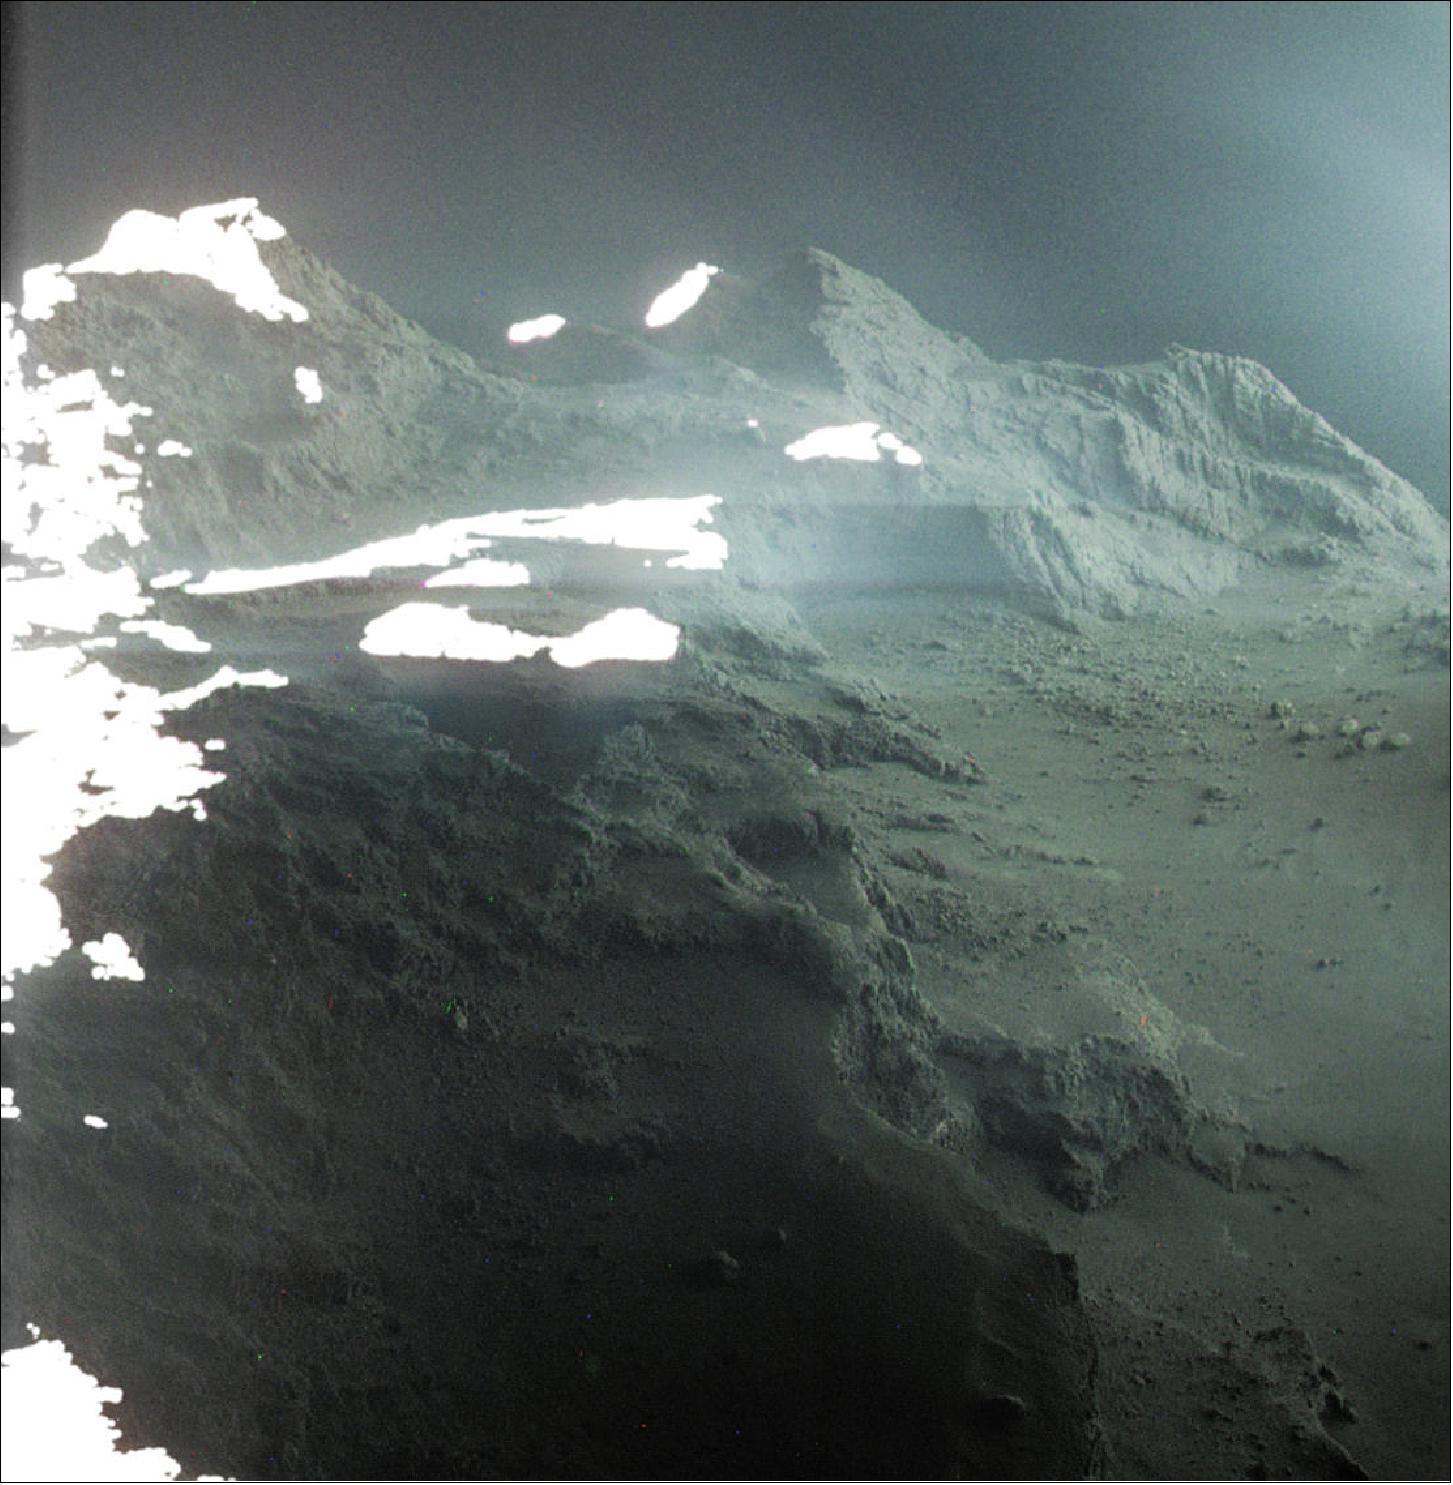 Figure 71: An evocative image of Rosetta's comet to recall the end of its trailblazing mission two years ago (image credit: ESA/Rosetta/MPS for OSIRIS Team MPS/UPD/LAM/IAA/SSO/INTA/UPM/DASP/IDA; J. Roger – CC BY SA 4.0)